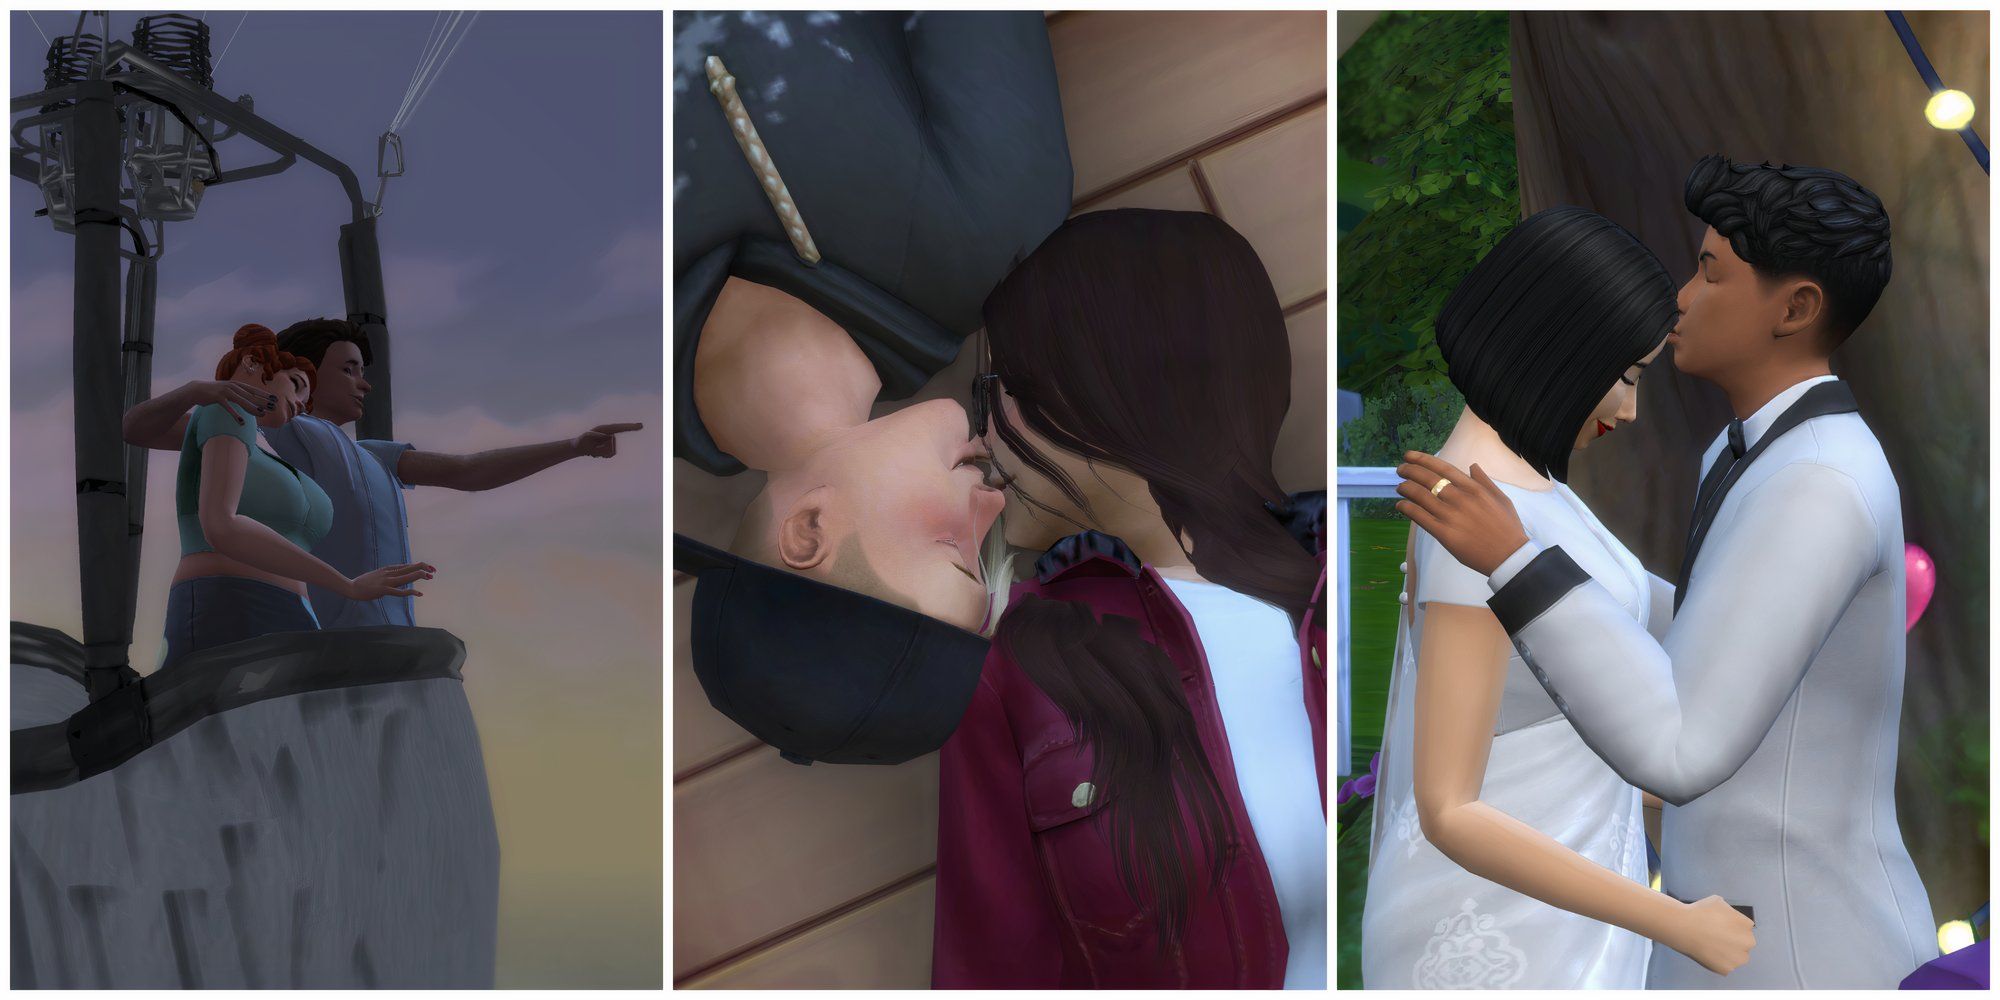 Romantic photos taken from the Passionate Romance mod